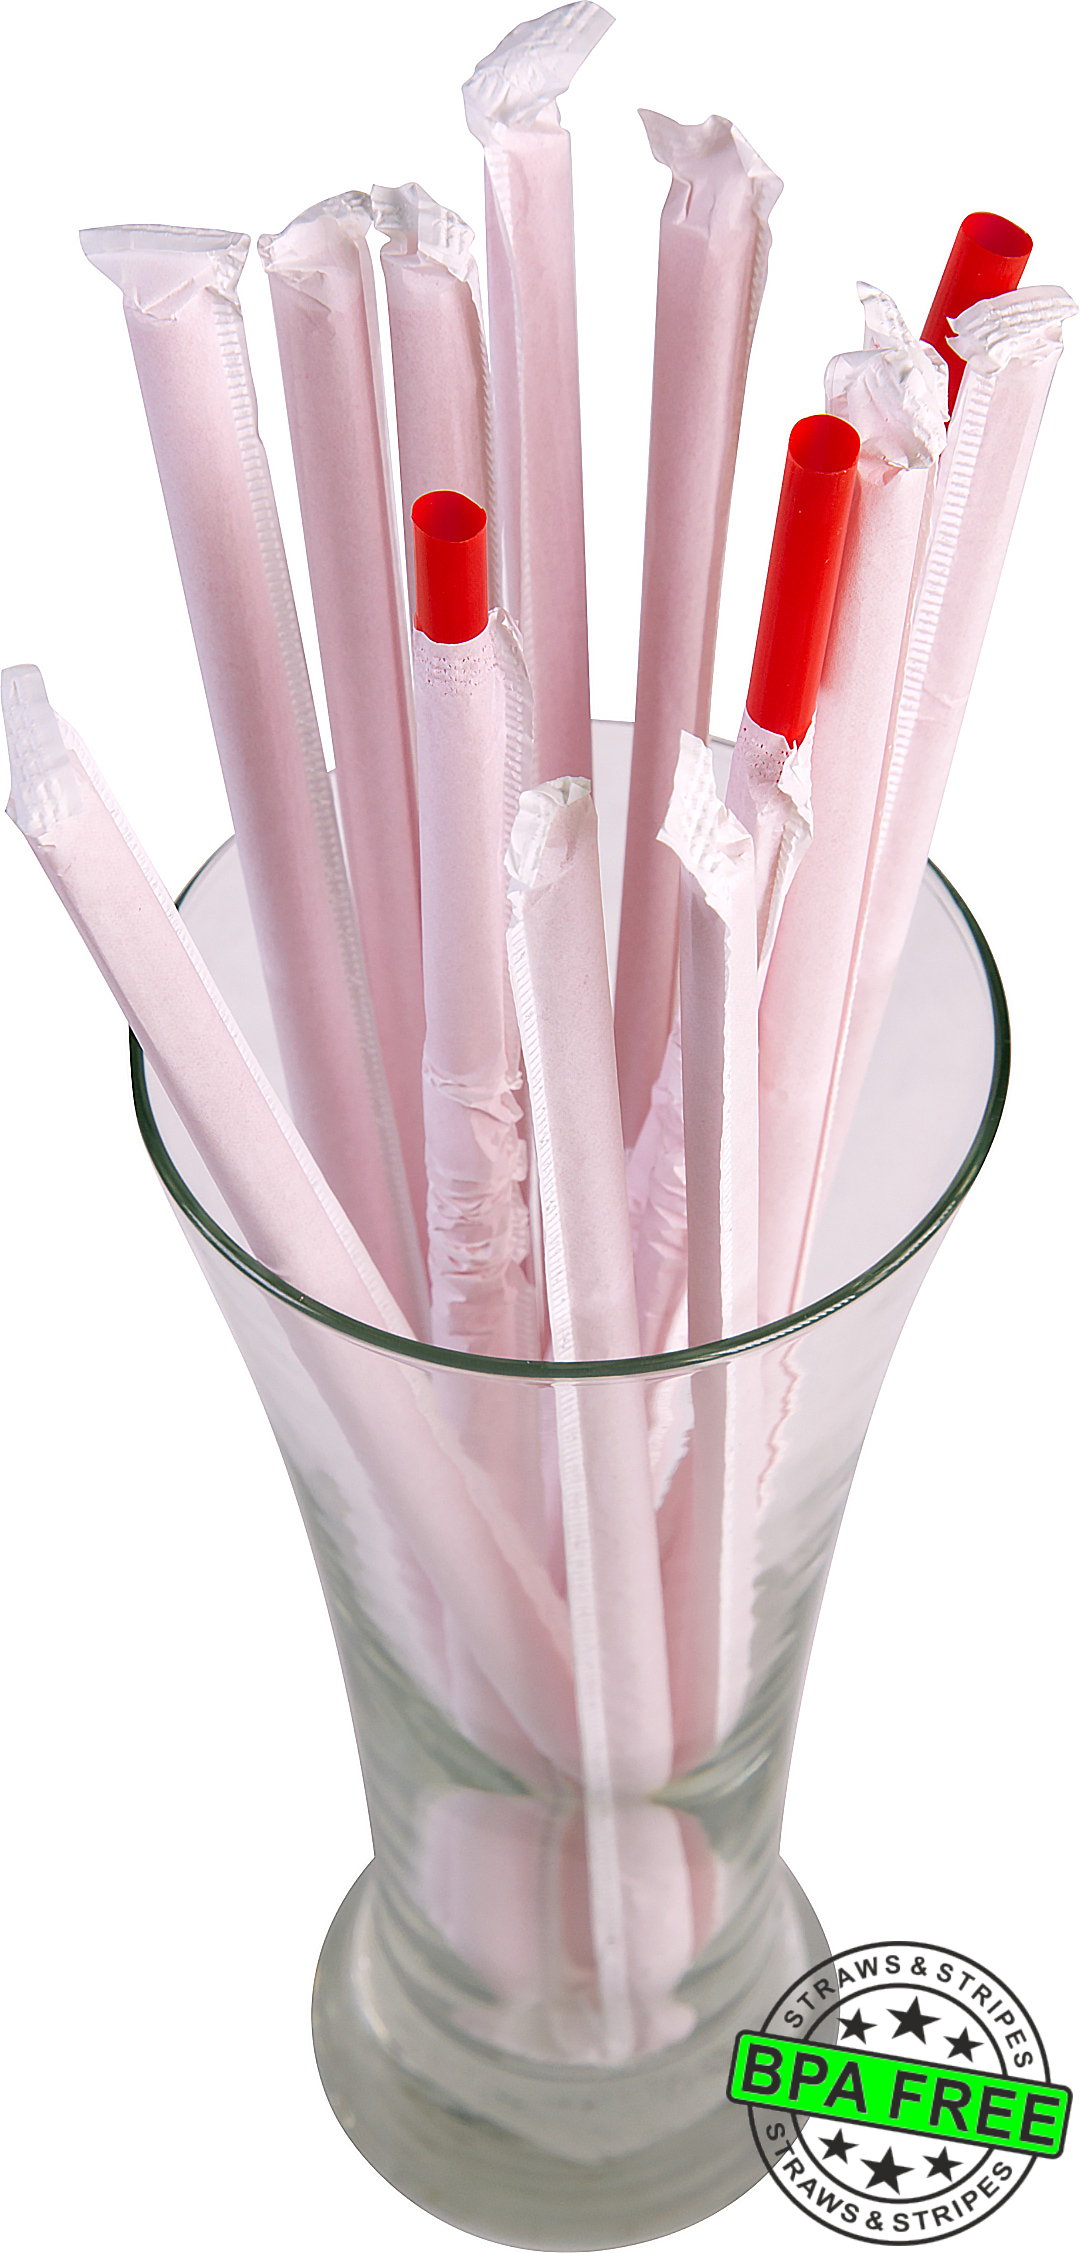 1 CASE - 2,500 (10x250) PAPER WRAPPED SMOOTHIE drinking straws 10 x 0.28 inch - color: red